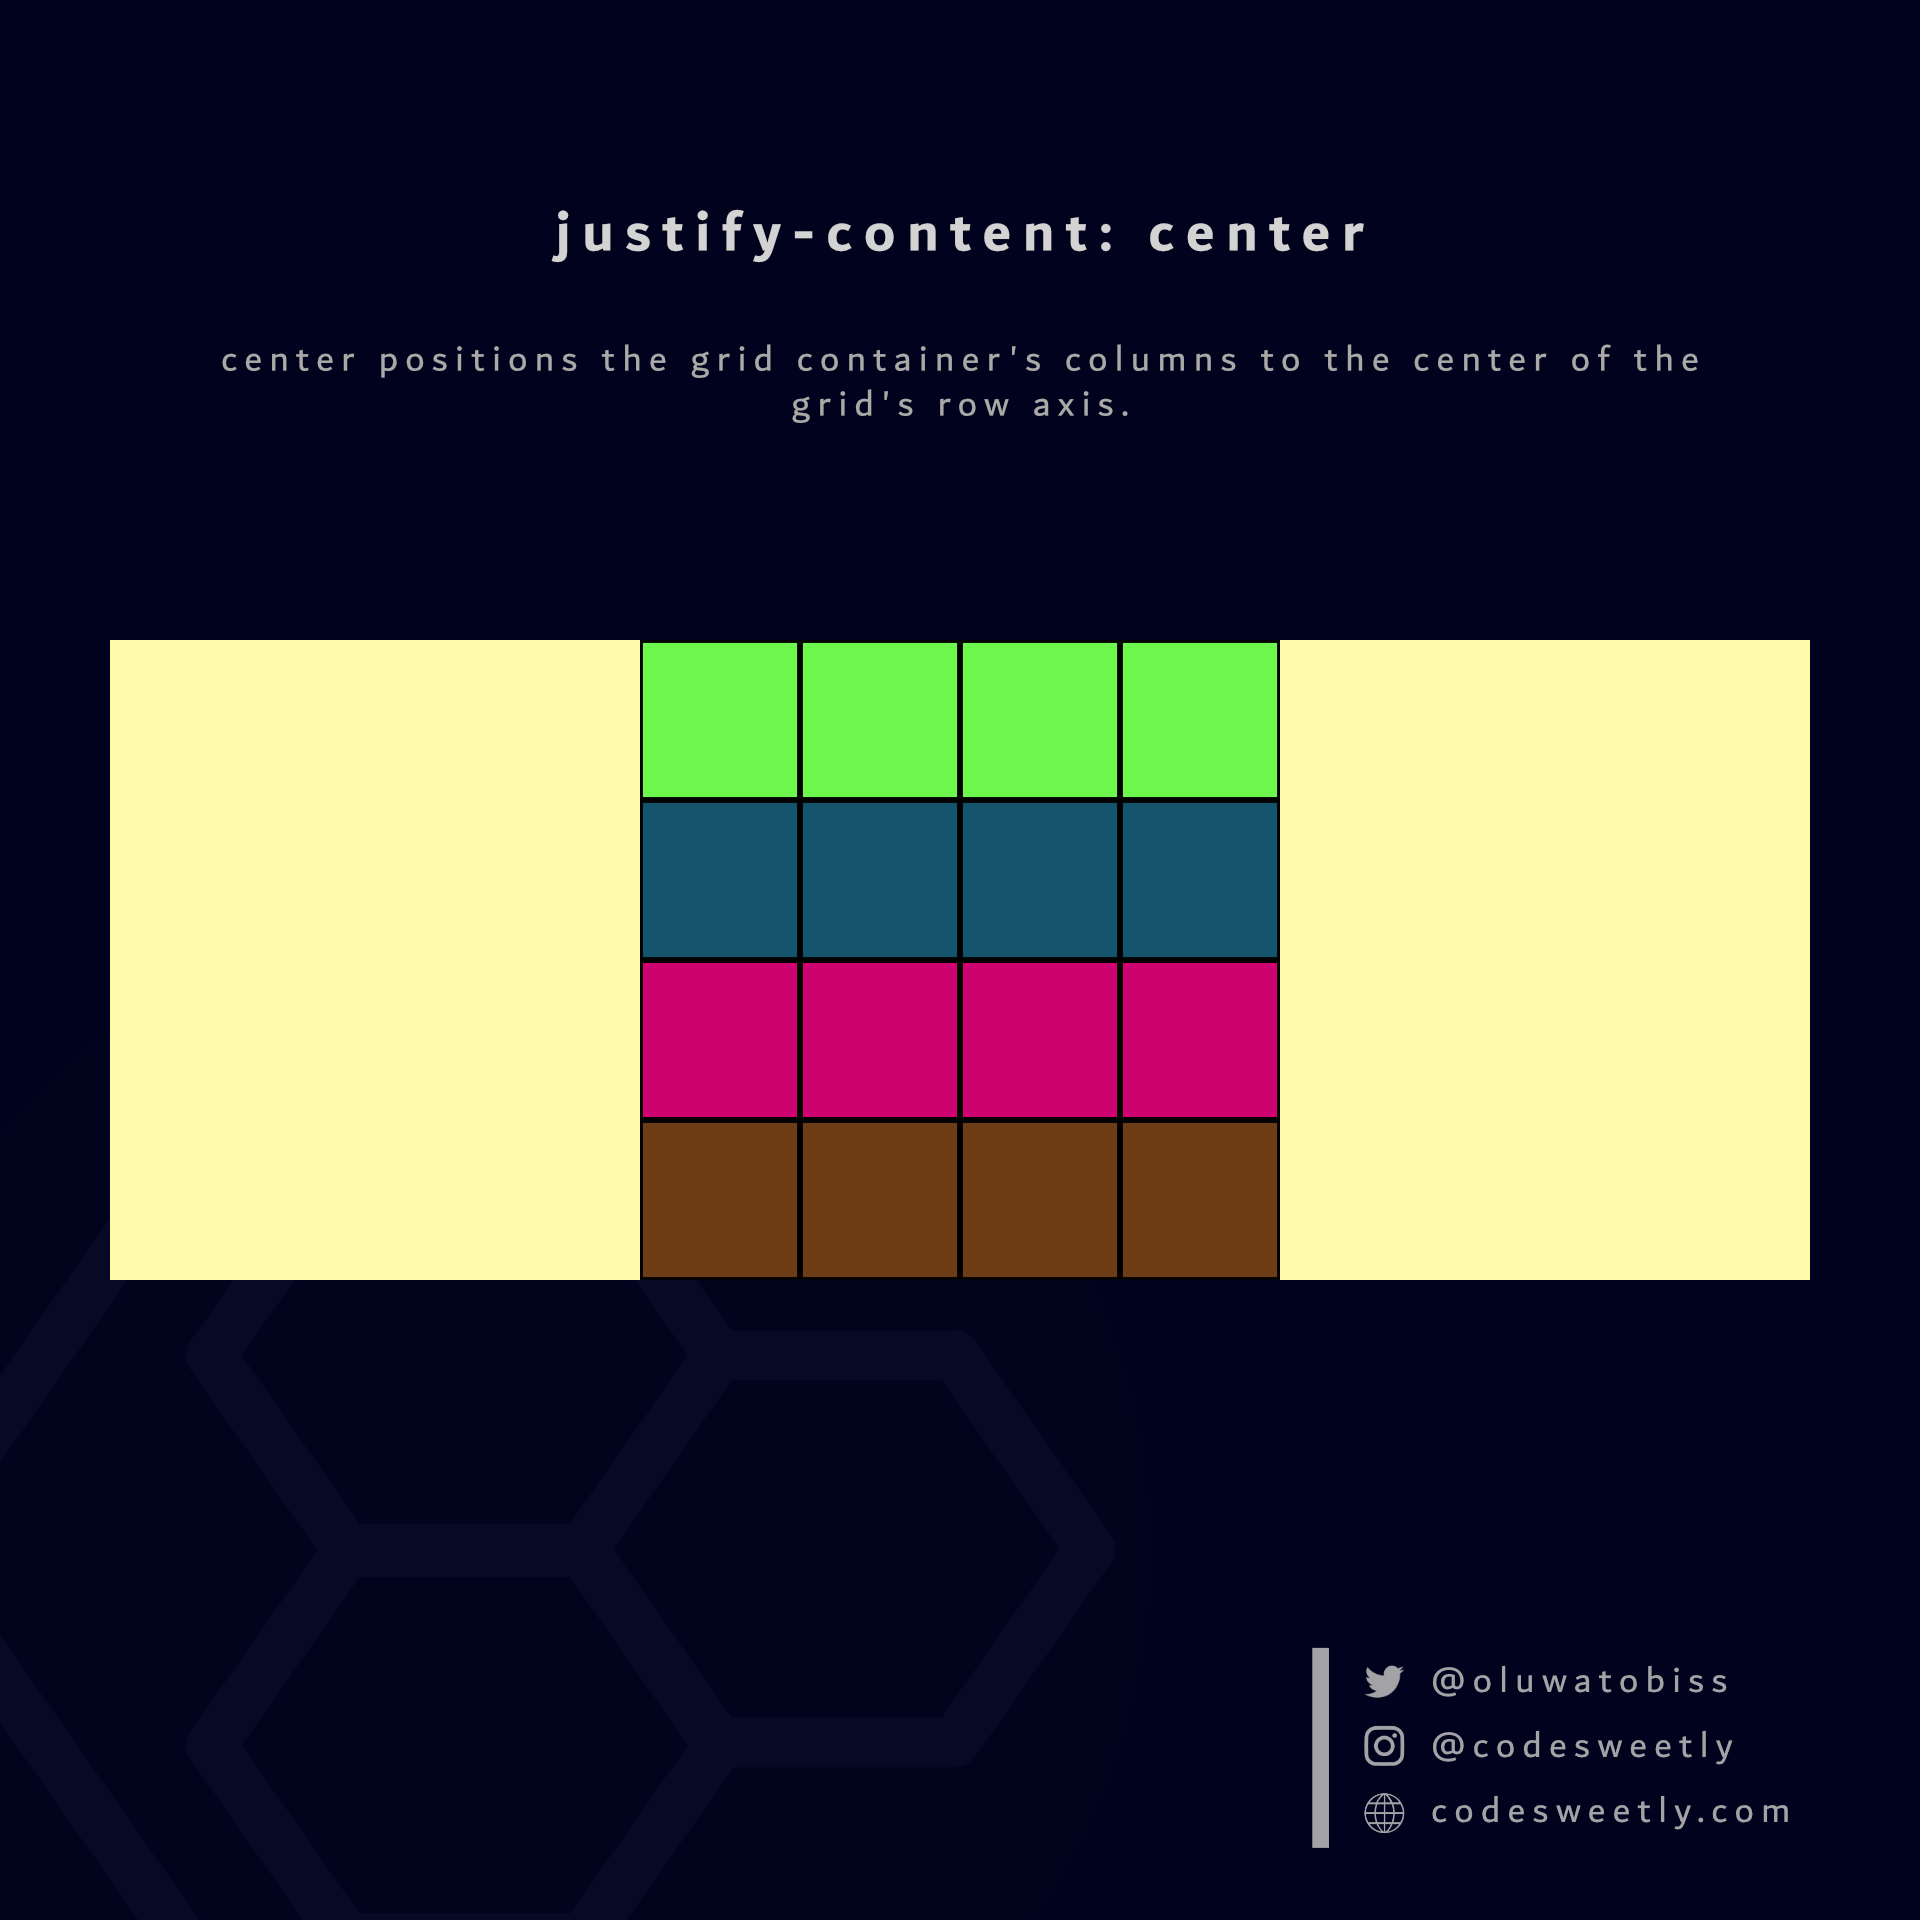 justify-content's center value positions columns to the center of the grid container